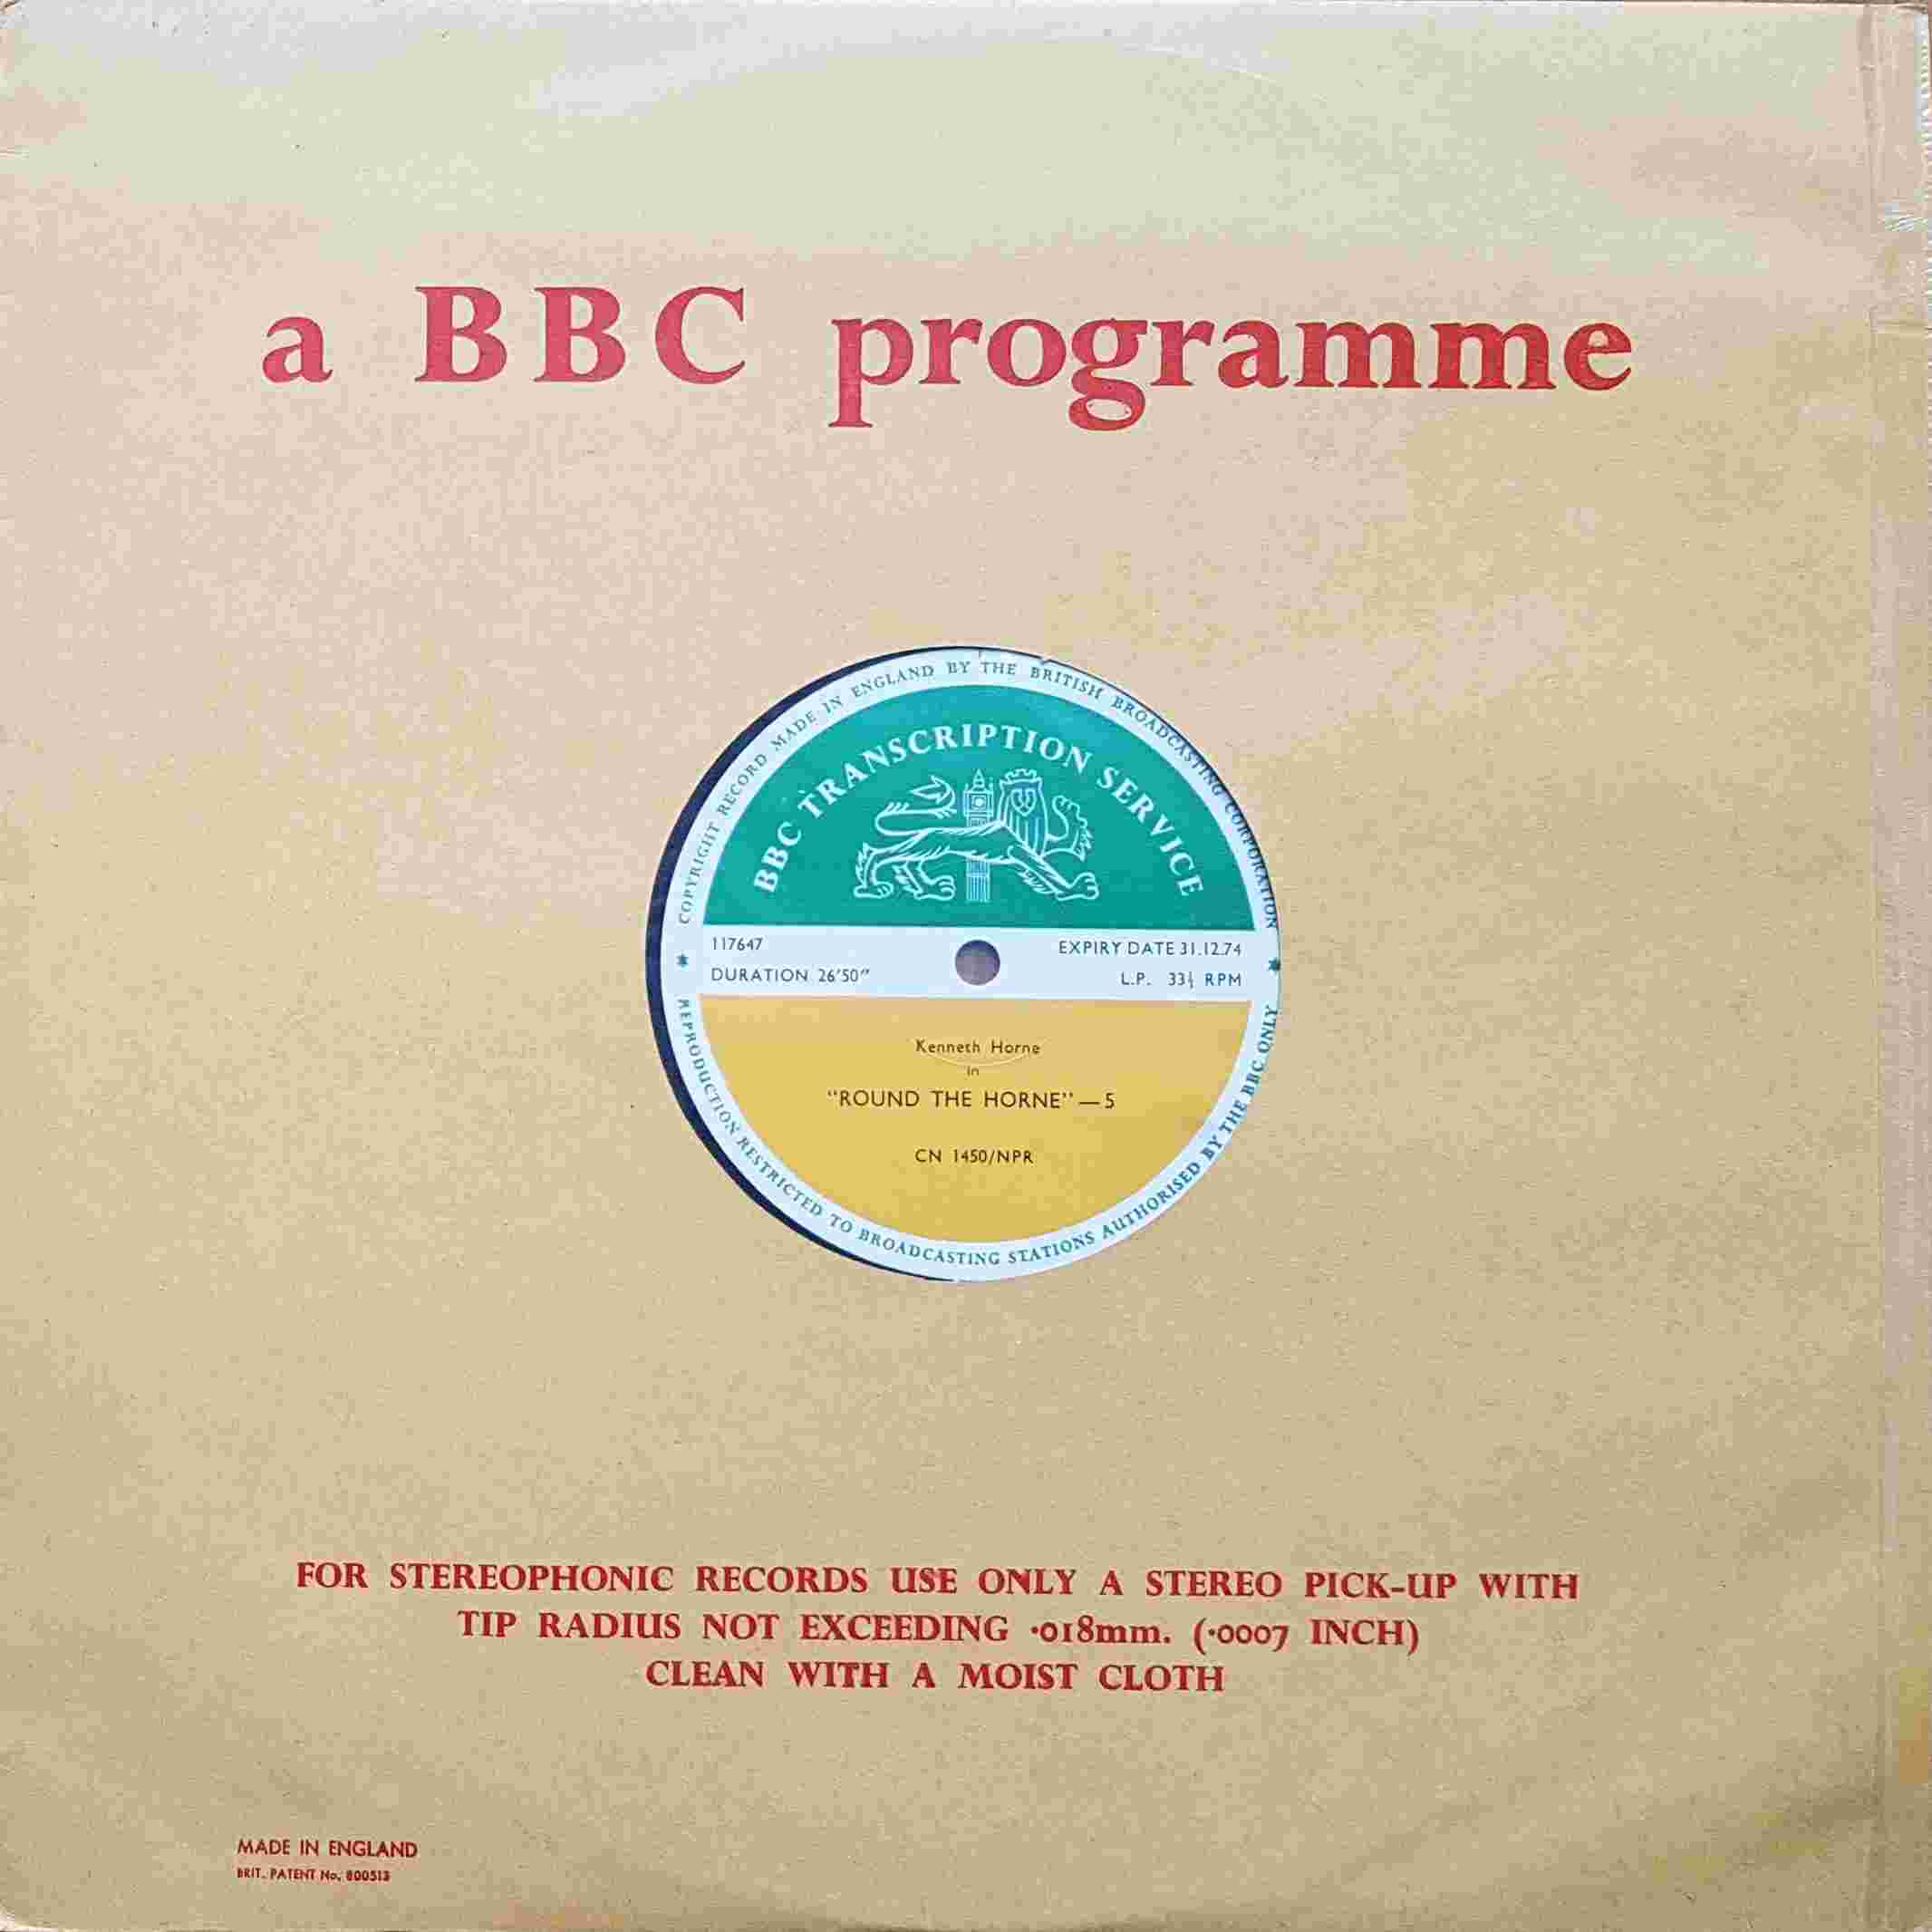 Picture of CN 1450 NPR 3 Round the Horne - 5 & 6 by artist Kenneth Horne from the BBC albums - Records and Tapes library